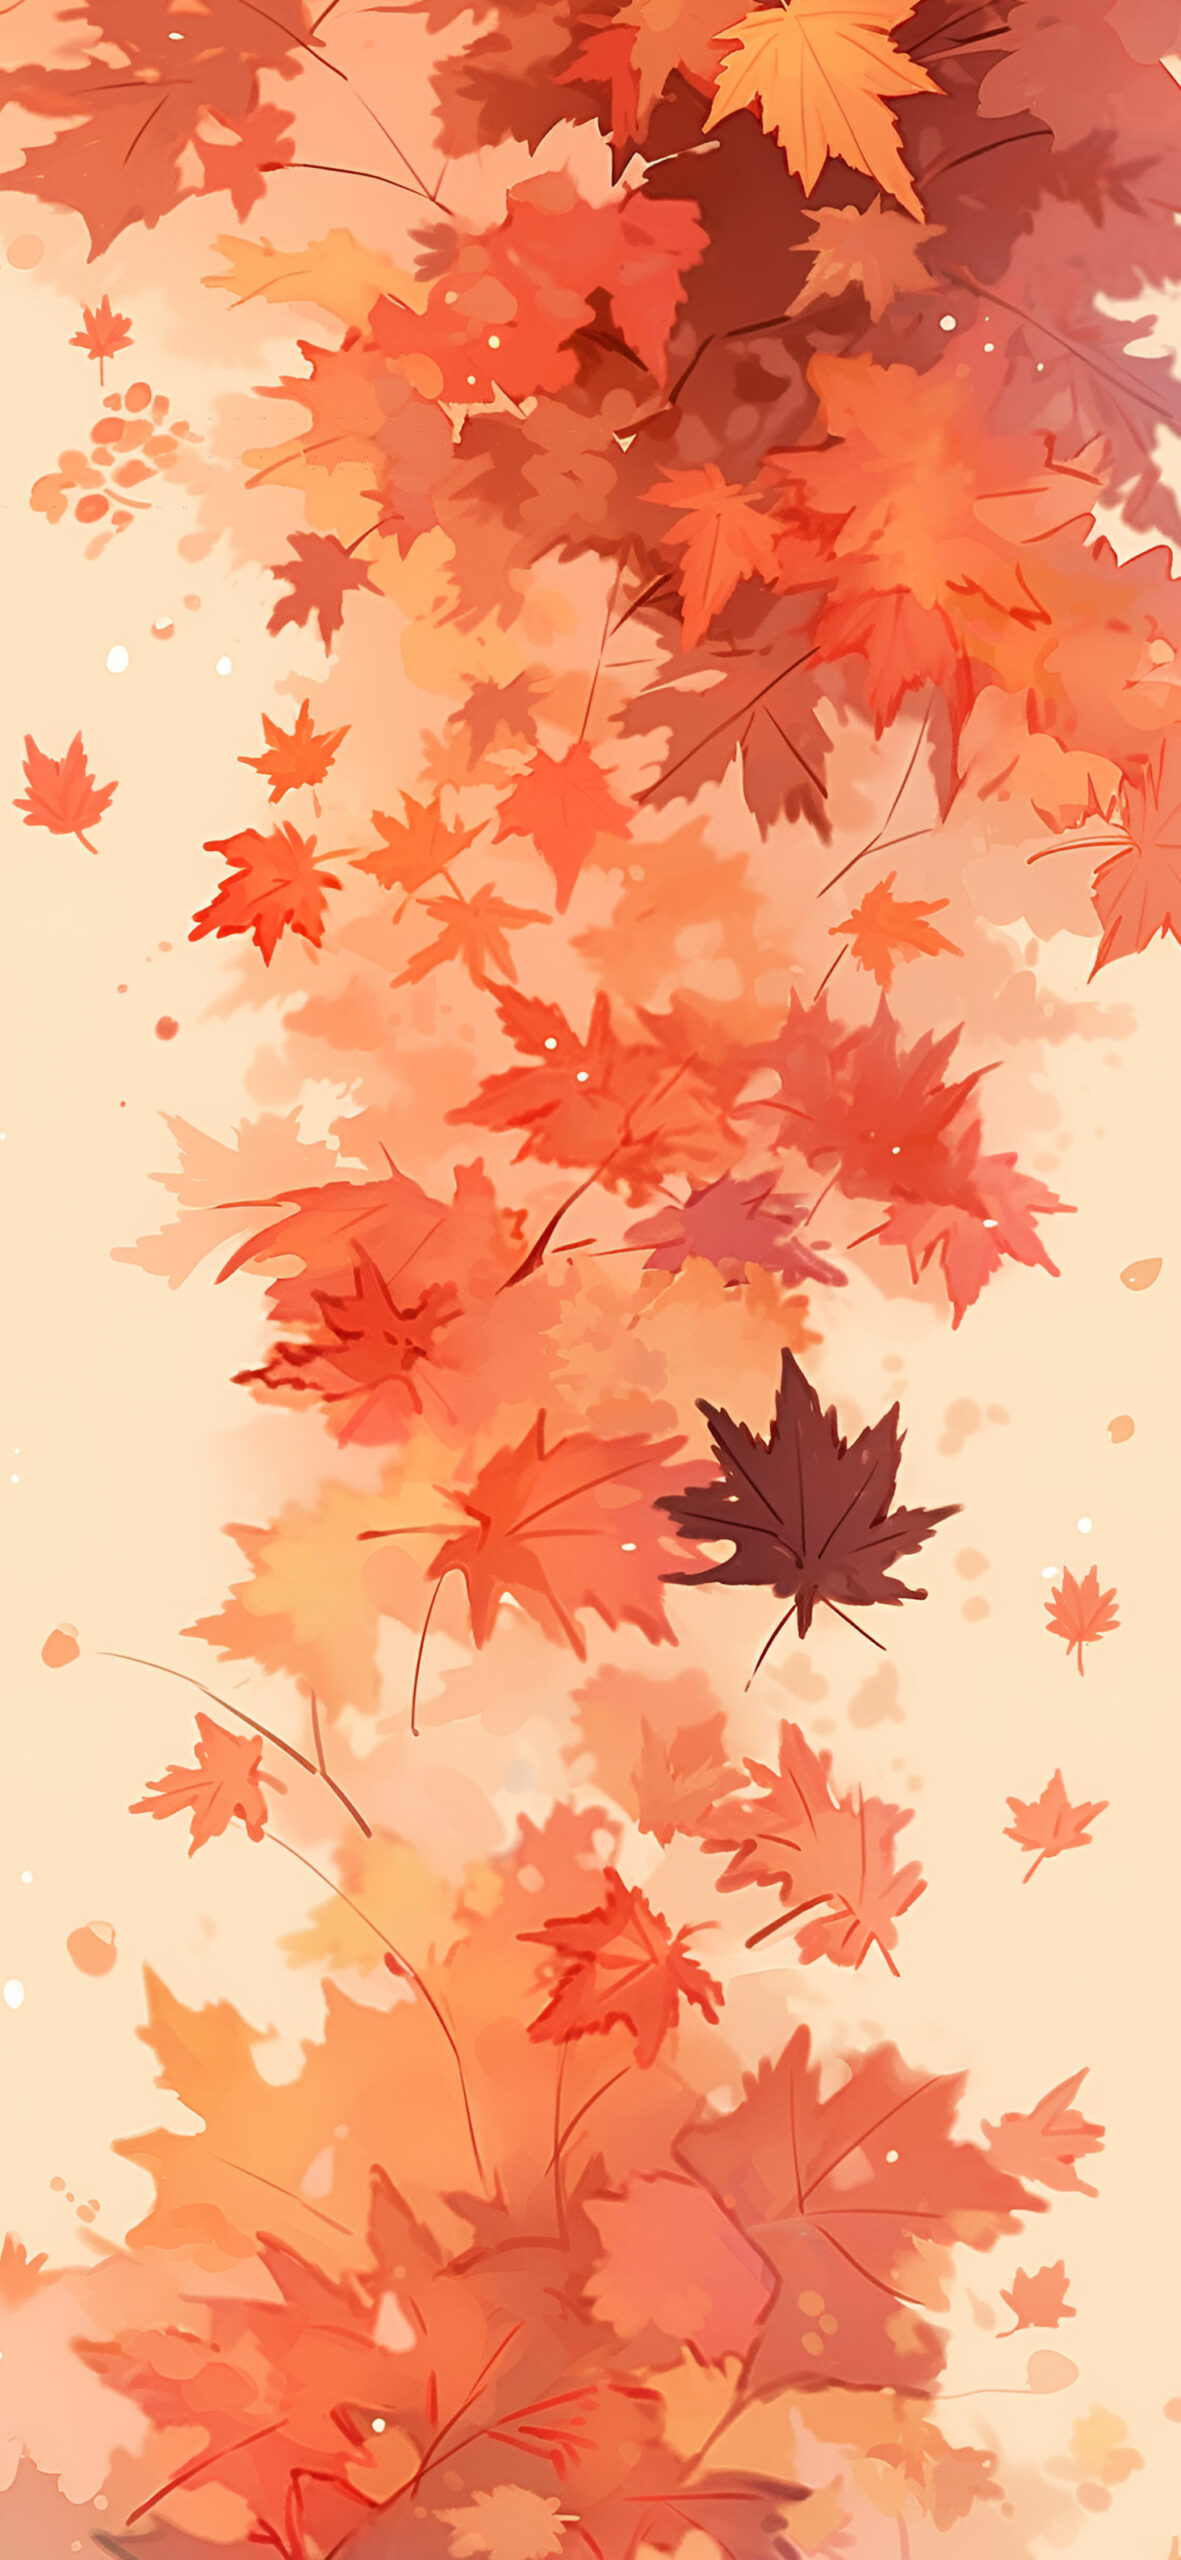 Red Autumn Leaves Pattern Wallpaper Autumn Wallpaper for iPhon